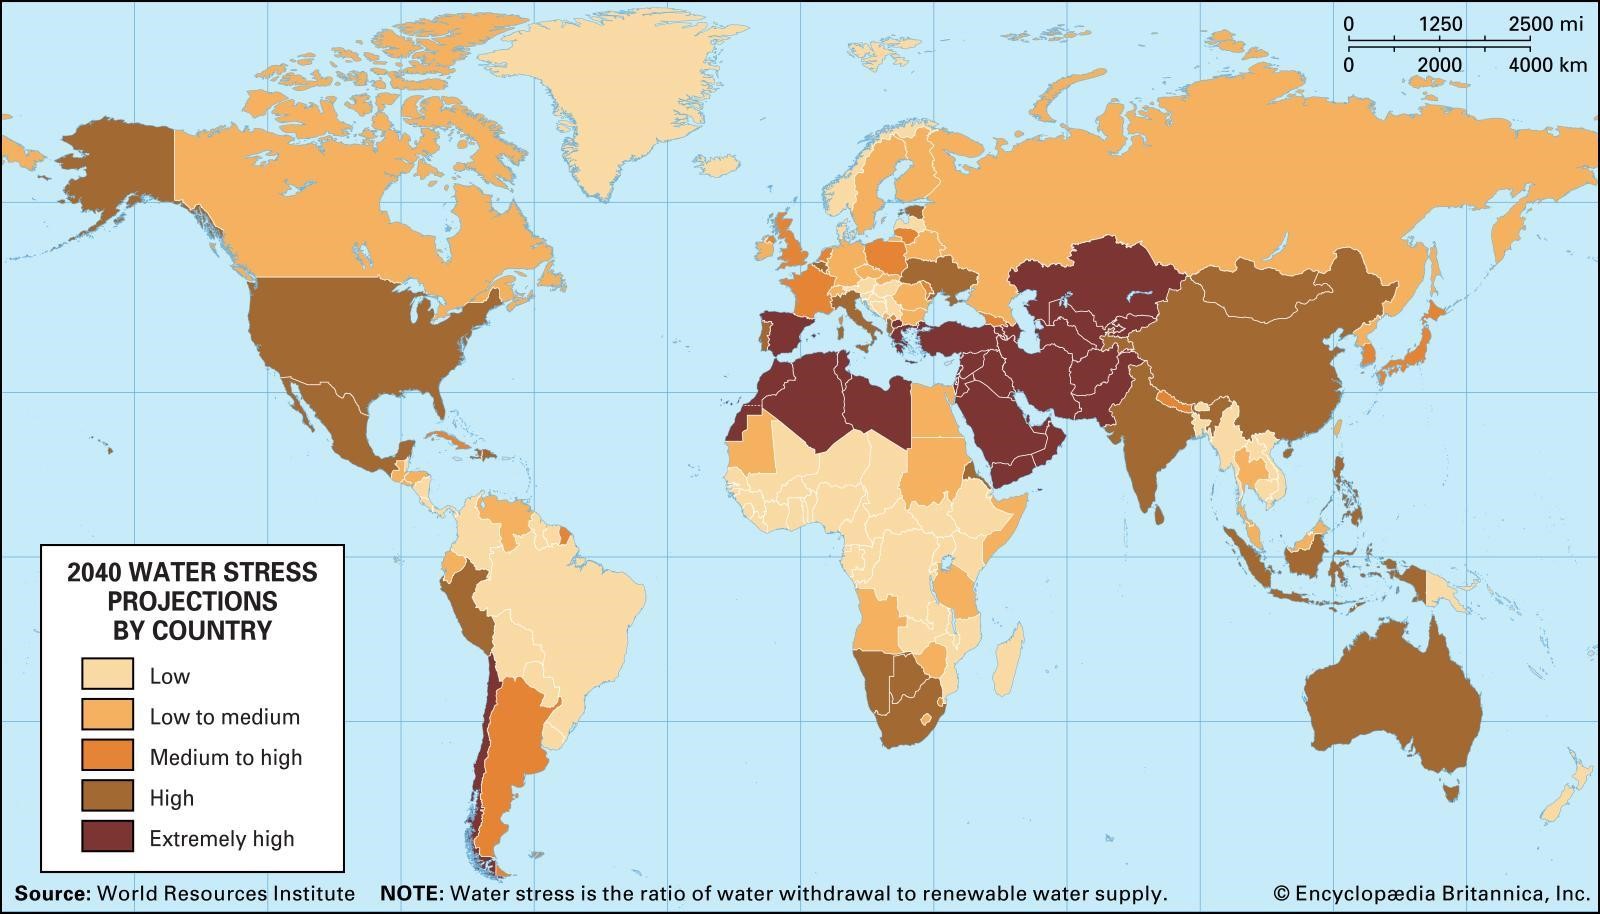 Projected global water stress levels in 2040. Image courtesy of Encyclopædia Britannica.